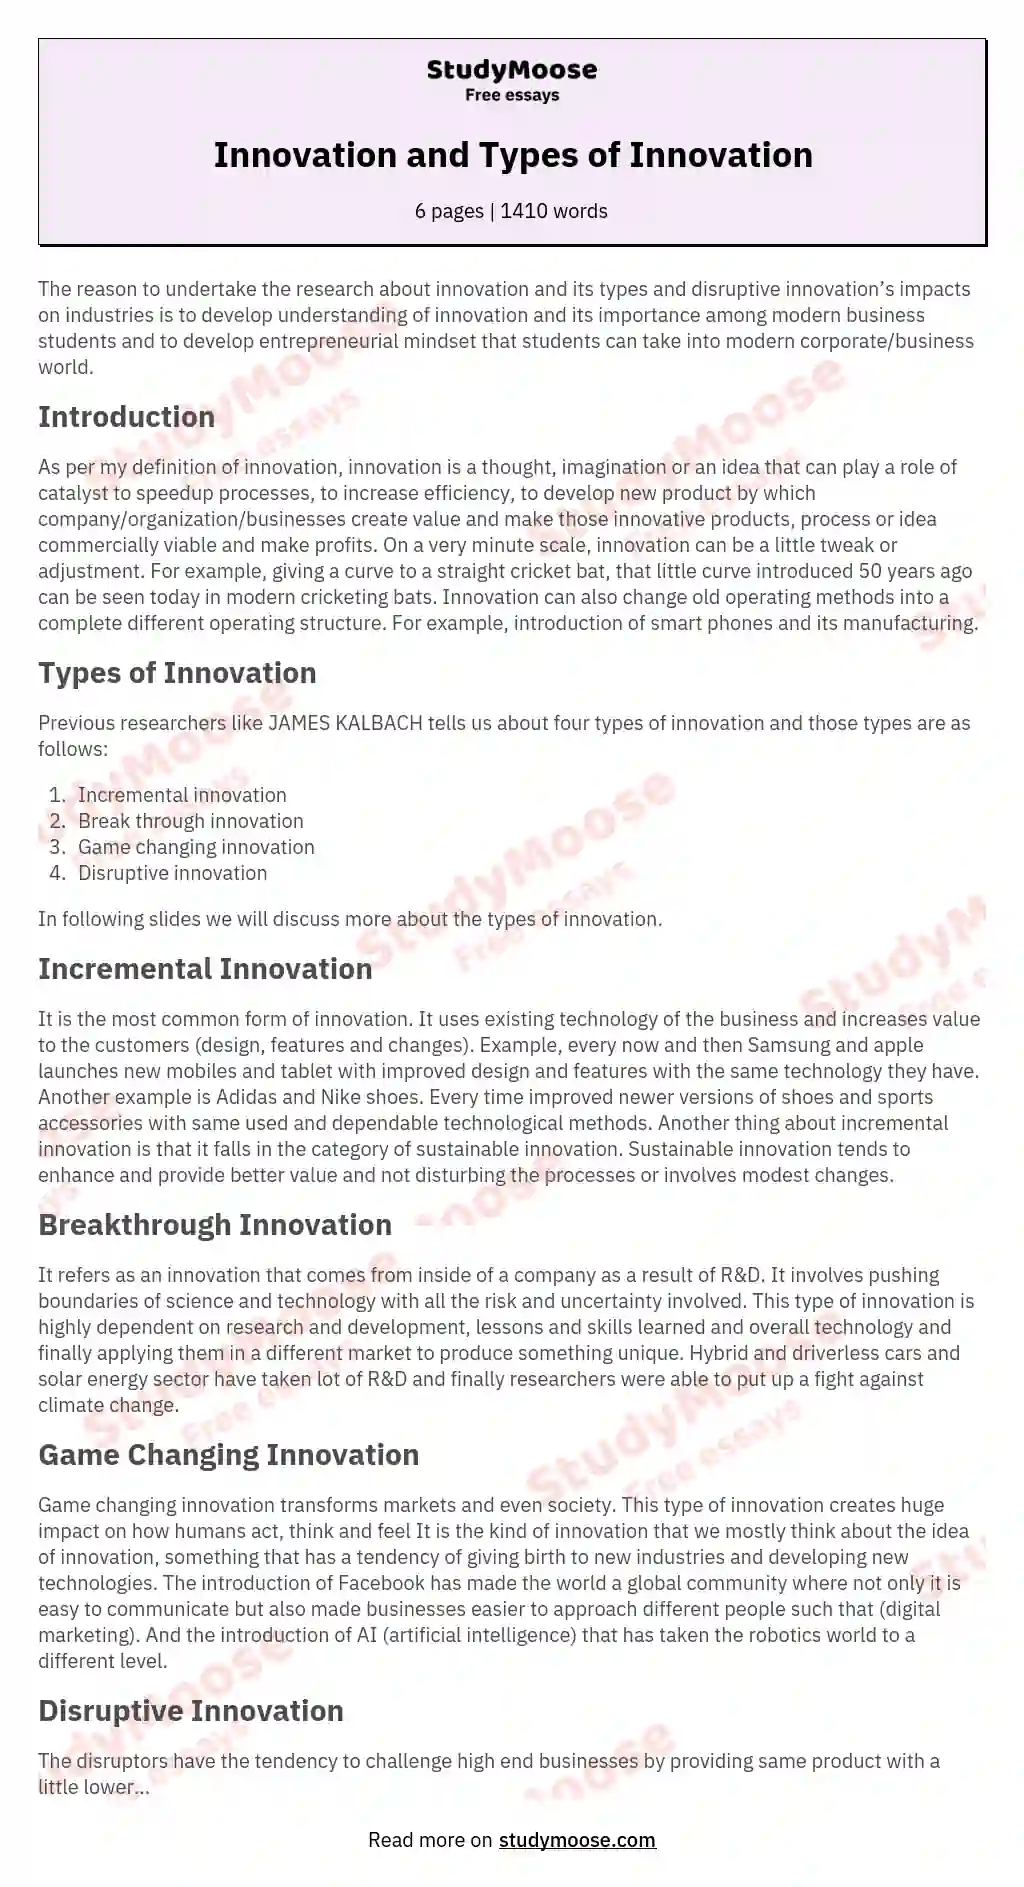 Innovation and Types of Innovation